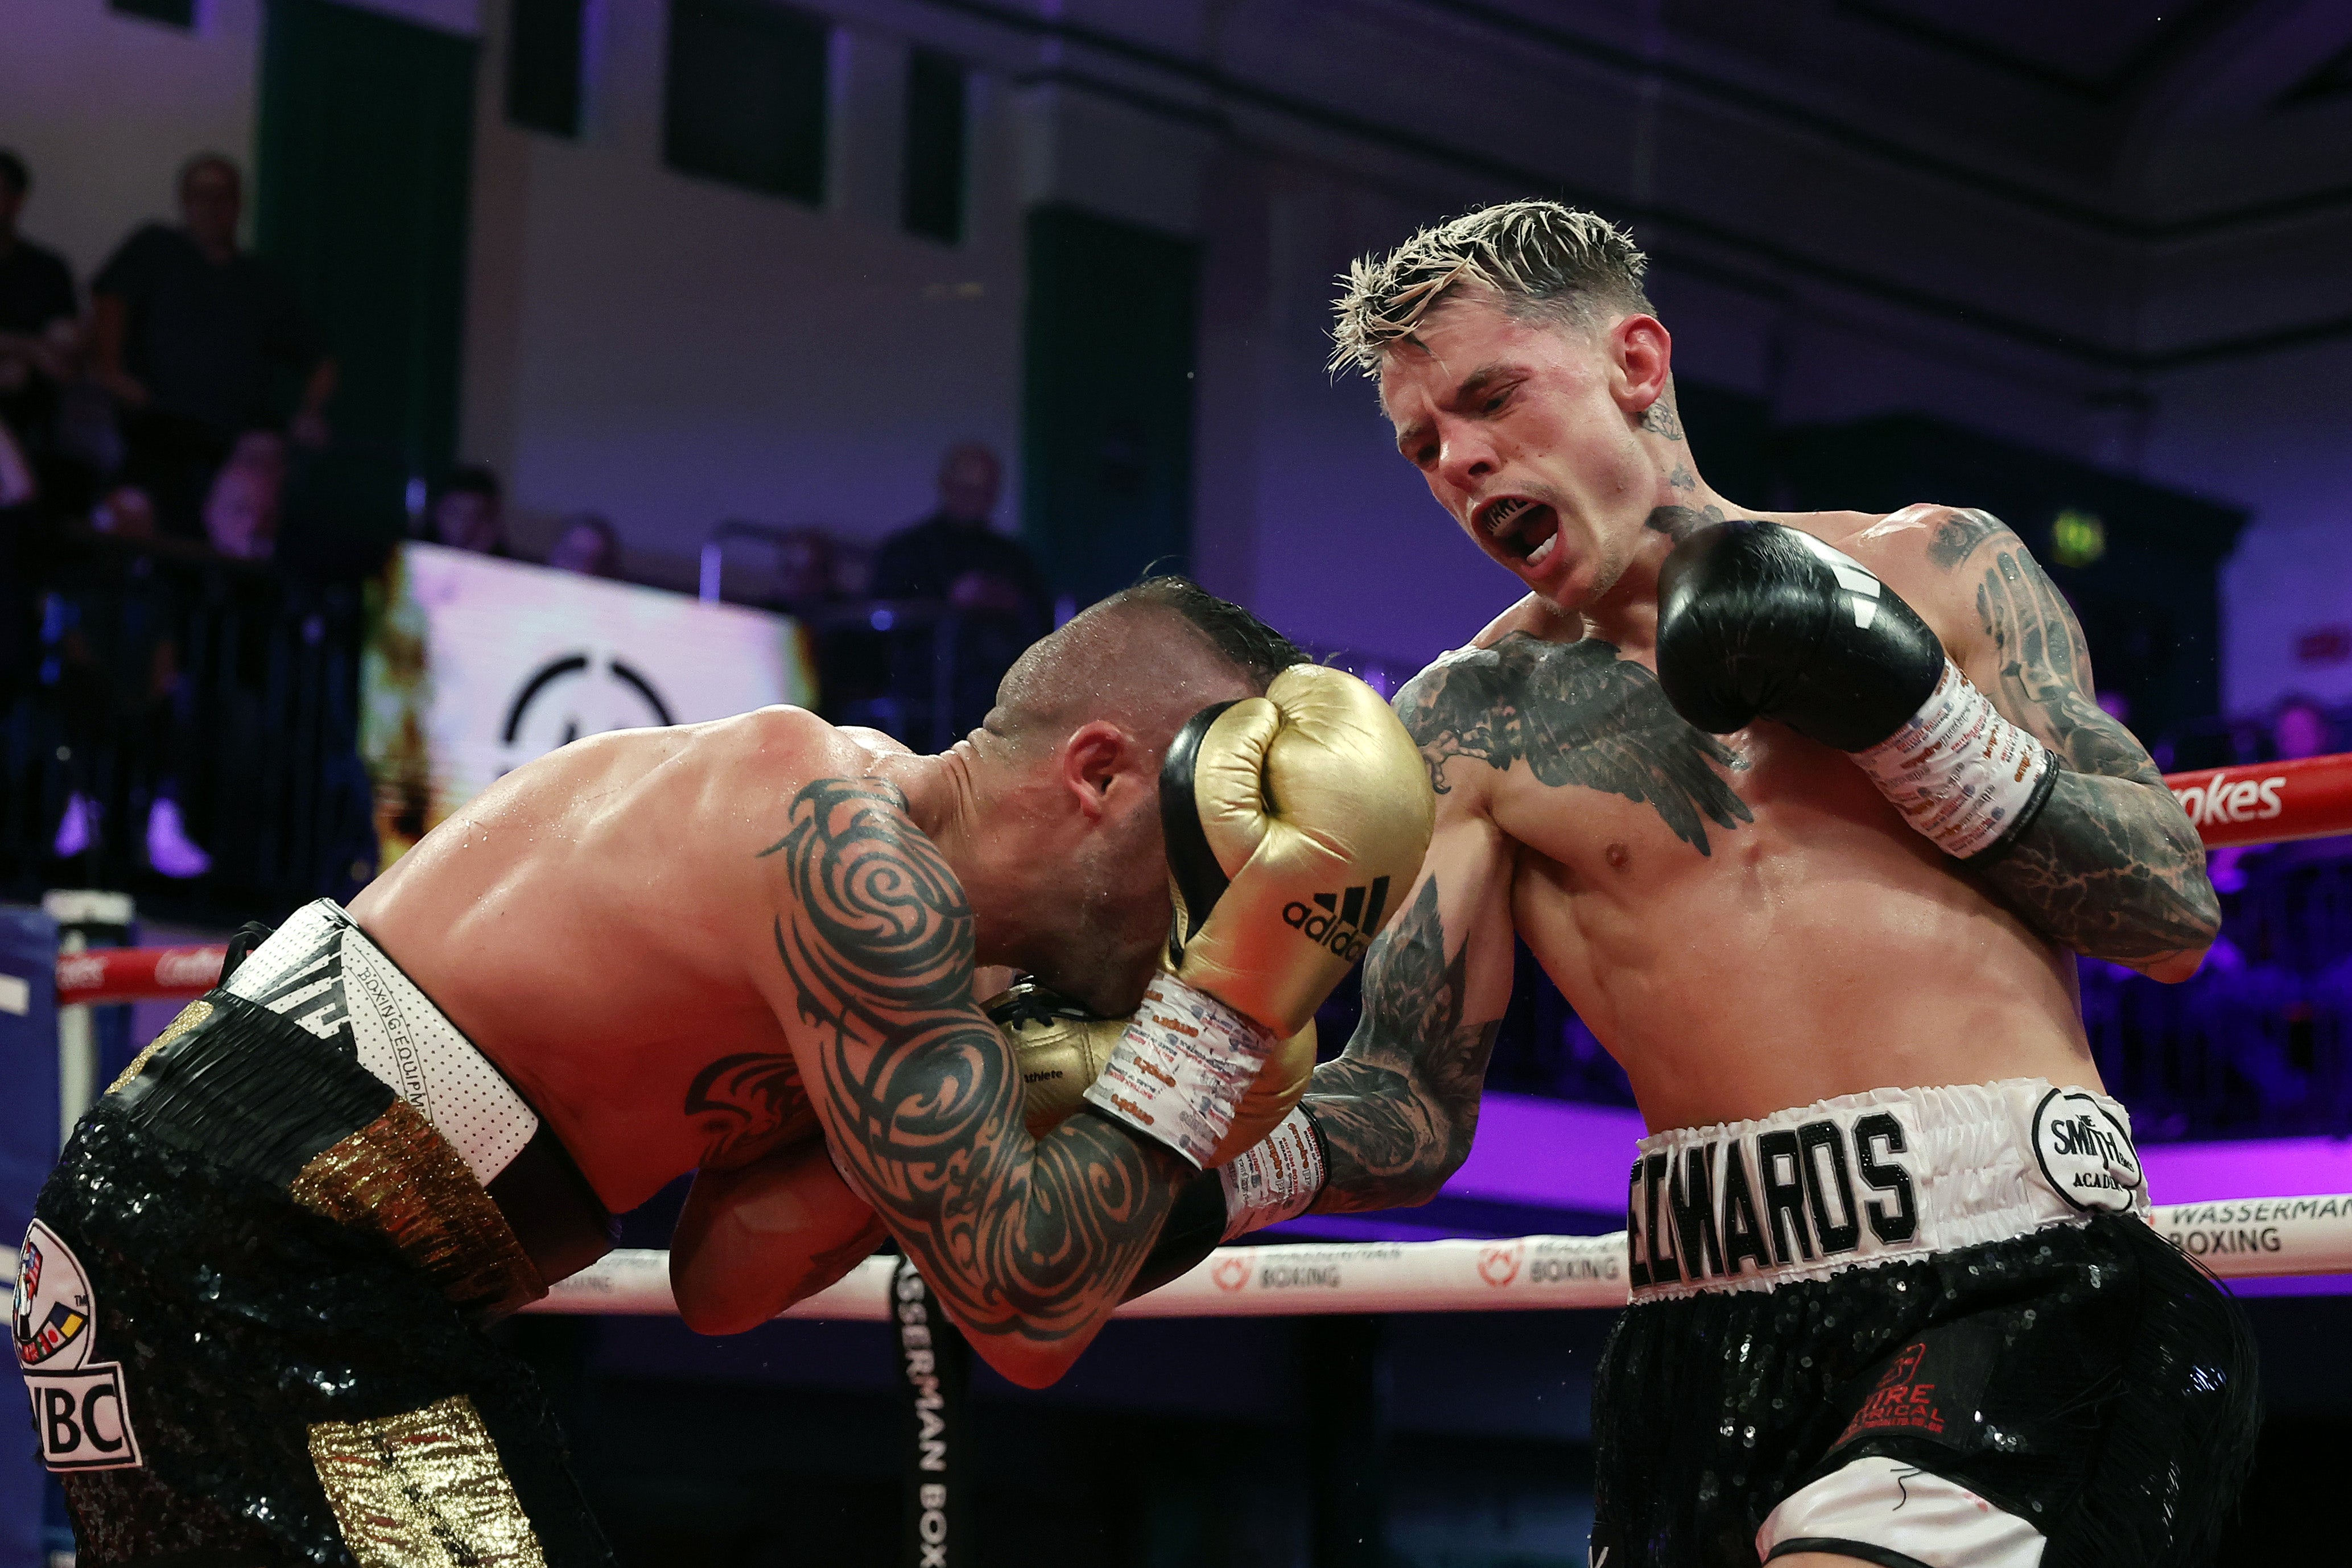 charlie edwards saves his career after lost years – just don’t call it a comeback